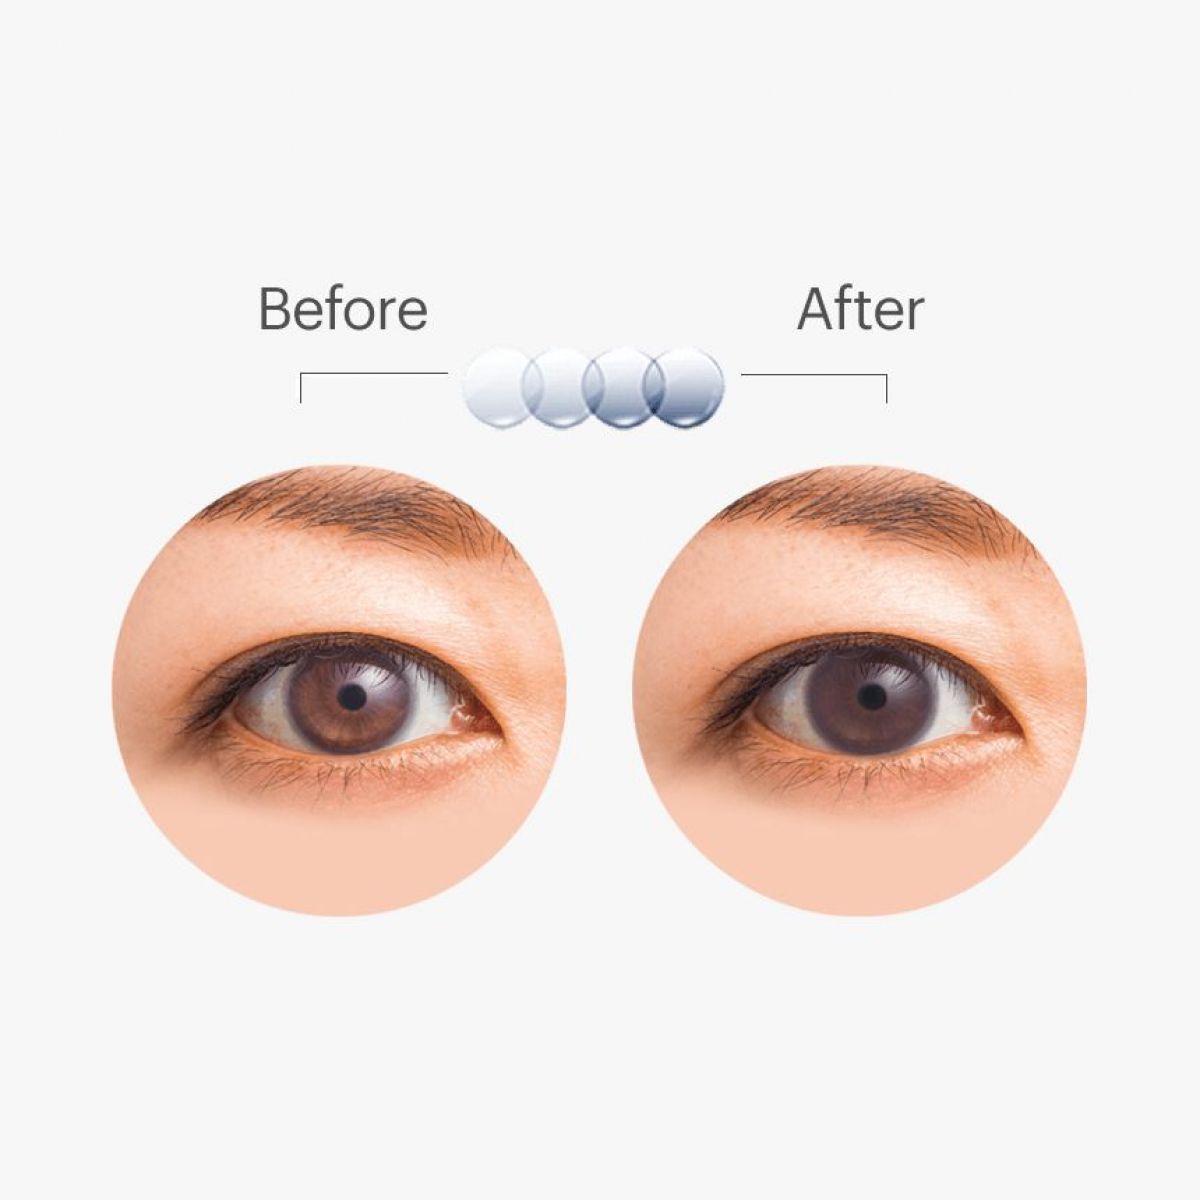 ACUVUE OASYS WITH TRANSITIONS ΦΩΤΟΧΡΩΜΙΚΟΙ ΔΕΚΑΠΕΝΘΗΜΕΡΟΙ ΦΑΚΟΙ ΕΠΑΦΗΣ ΜΥΩΠΙΑΣ ΥΠΕΡΜΕΤΡΩΠΙΑΣ (6 ΦΑΚΟΙ)